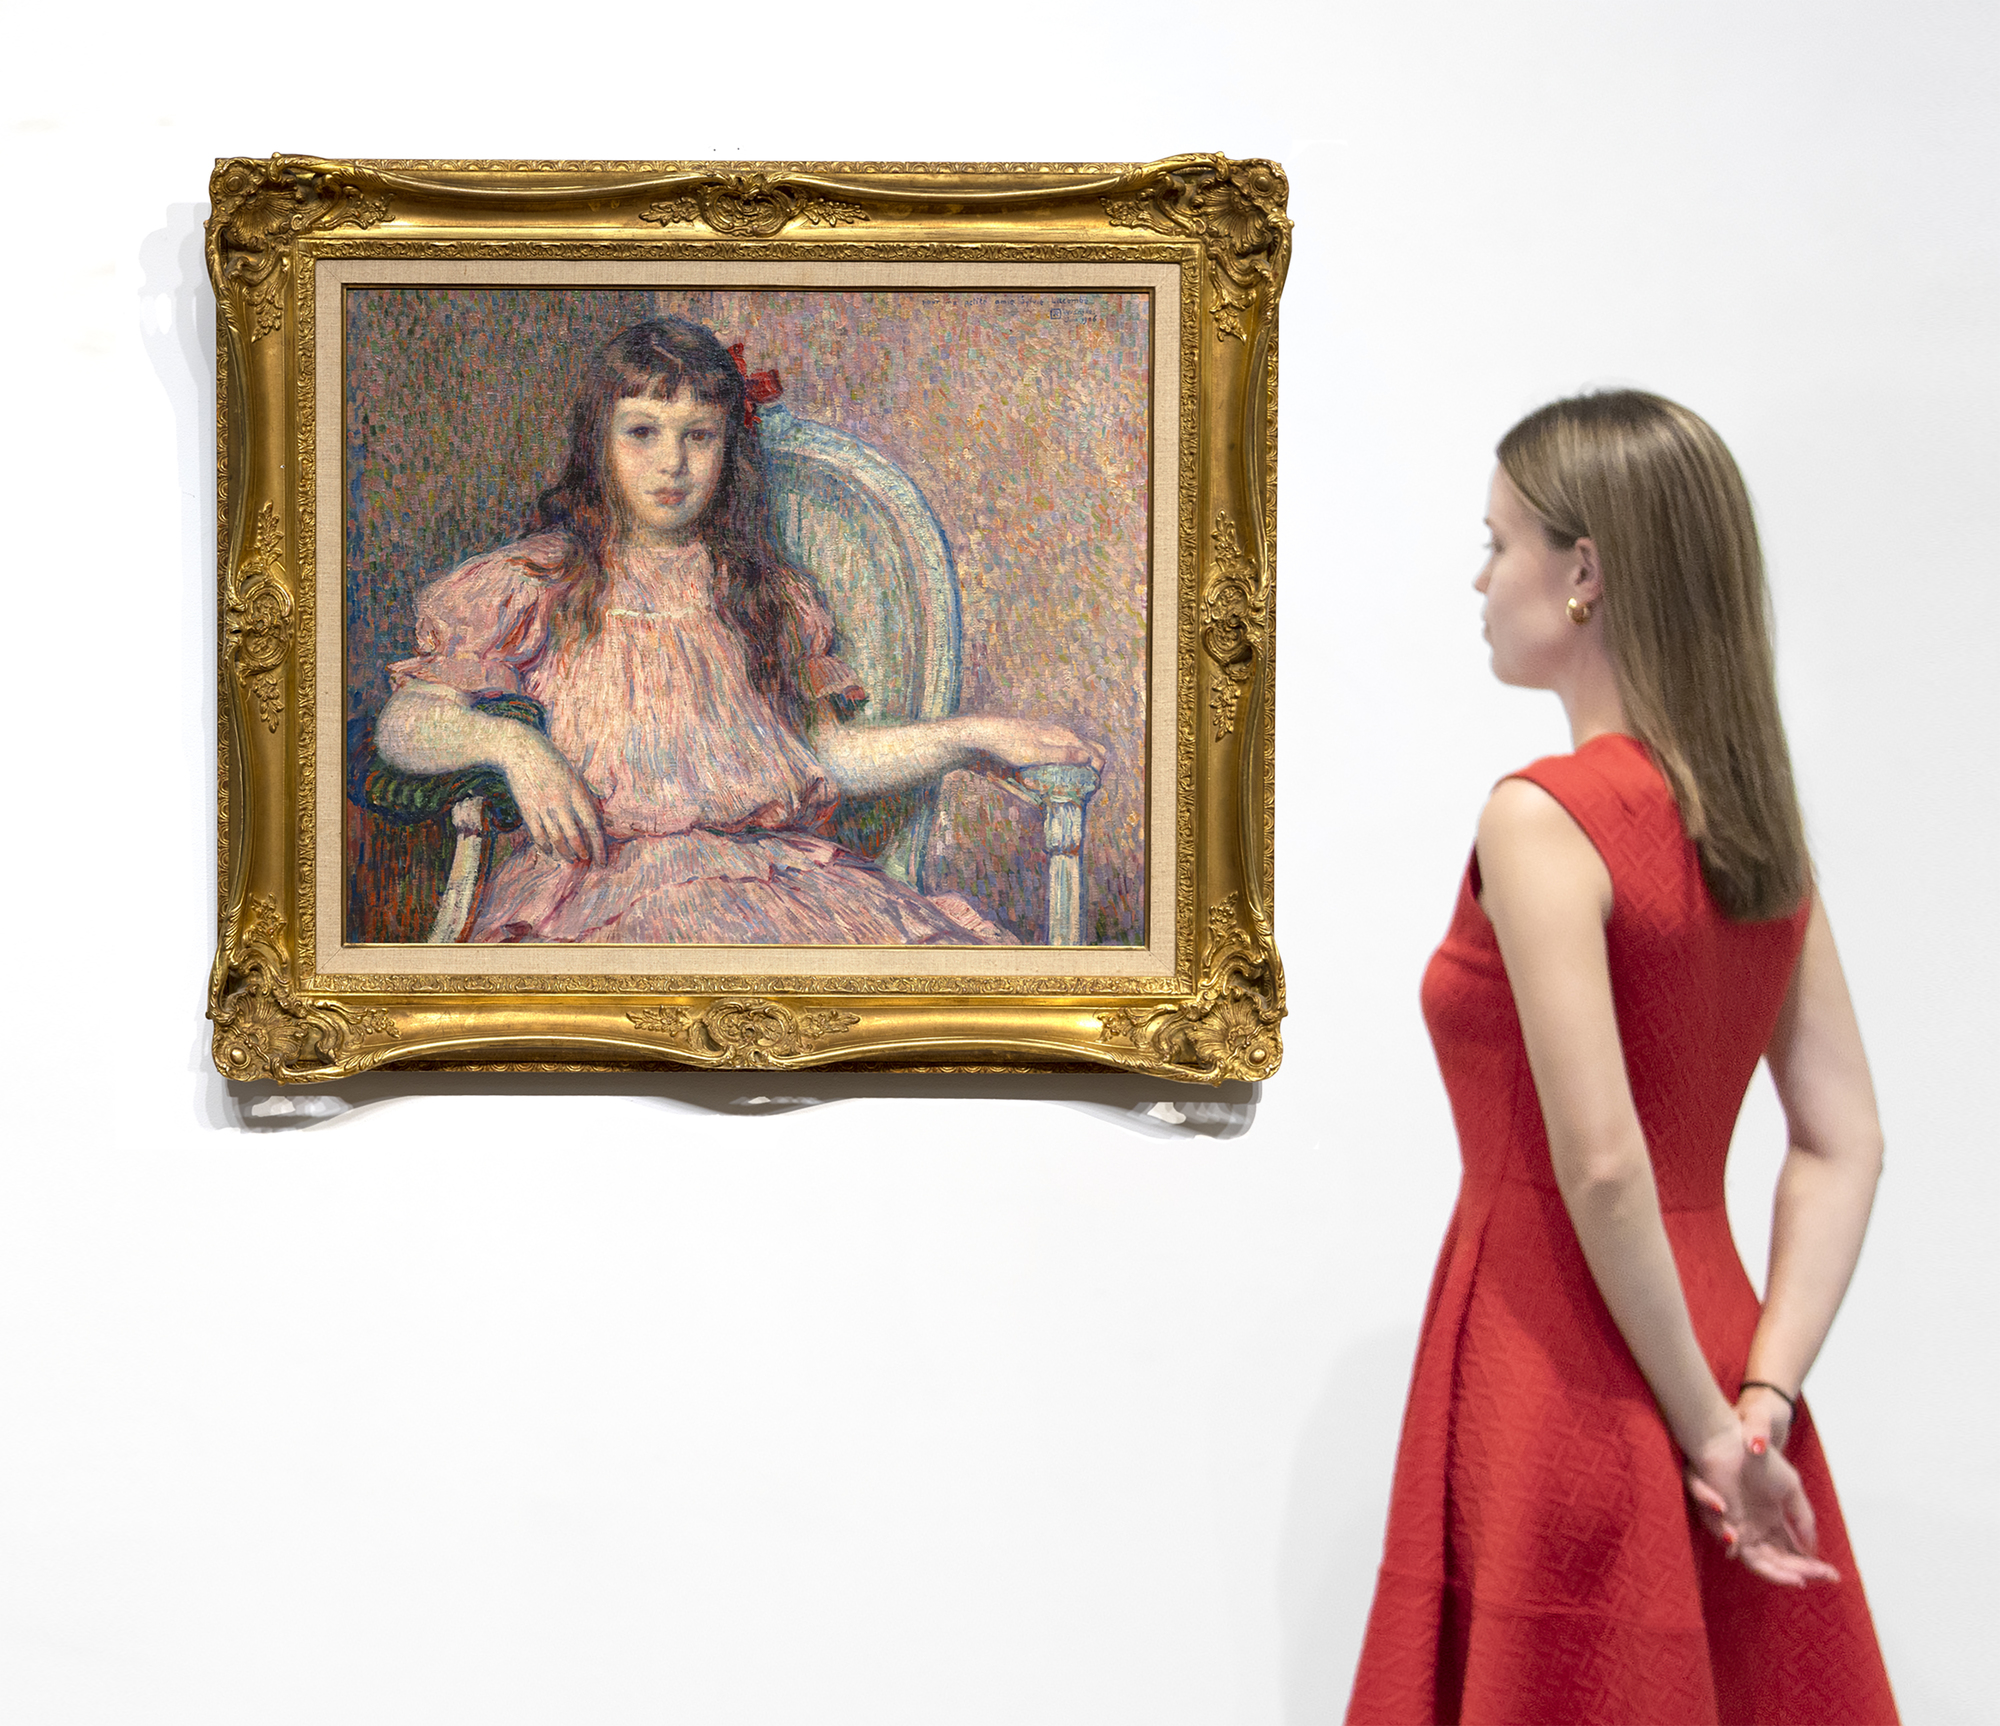 Théo van Rysselberghe’s Portrait de Sylvie Lacombe, painted in 1906, is a classic masterwork by one of the most refined and consistent portrait painters of his time. The color is harmonious, the brushwork vigorous and tailored to its material task, her body and countenance true and revealing. The sitter is the daughter of his good friend, the painter Georges Lacombe, who shared a close association with Gauguin, and was a member of Les Nabis with artists Bonnard, Denis, and Vuillard, among others. We now know about Sylvie Lacombe because Van Rysselberghe is so skilled at rendering subtle facial expressions and through careful observation and attention to detail, provided insights into her inner world. He has chosen a direct gaze, her eyes to yours, an inescapable covenant between subject and viewer regardless of our physical relationship to the painting. Van Rysselberghe had largely abandoned the Pointillist technique when he painted this portrait. But he continued to apply color theory guidelines by using tints of red — pinks and mauves — against greens to create a harmonious ameliorated palette of complementary colors to which he added a strong accent to draw the eye – an intensely saturated, red bow asymmetrically laid to the side of her head.